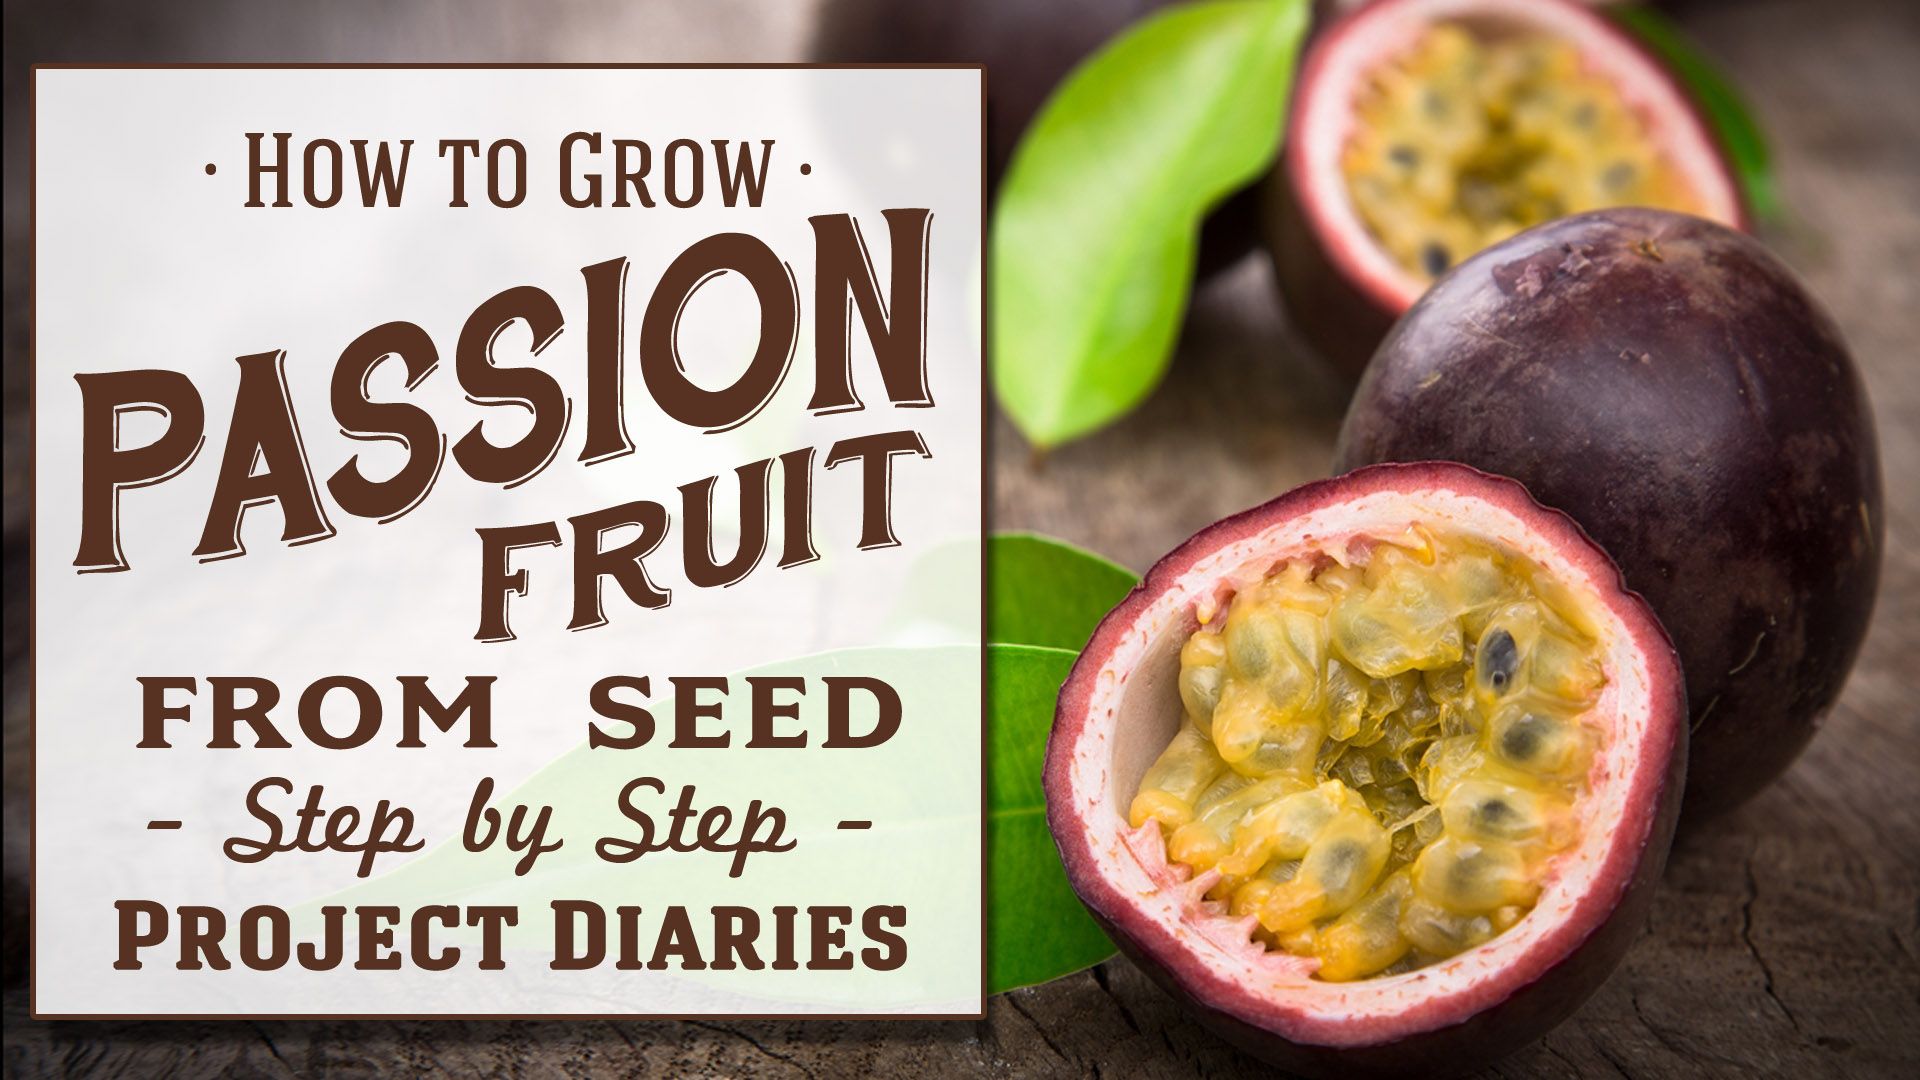 How to Grow Passion Fruit from Seed.jpg